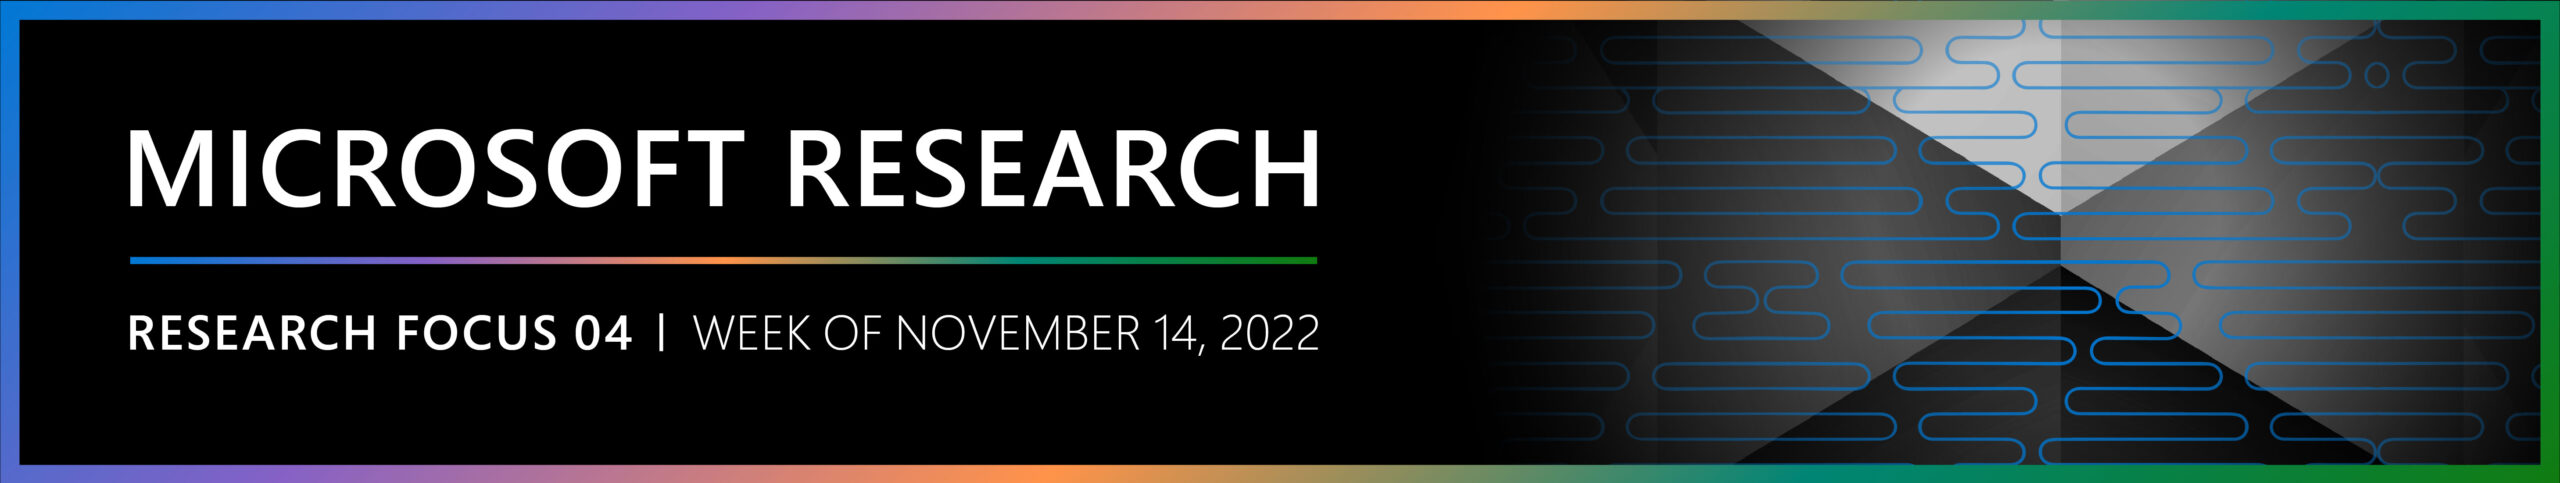 Microsoft Research - Research Focus 04
Week of November 14th, 2022